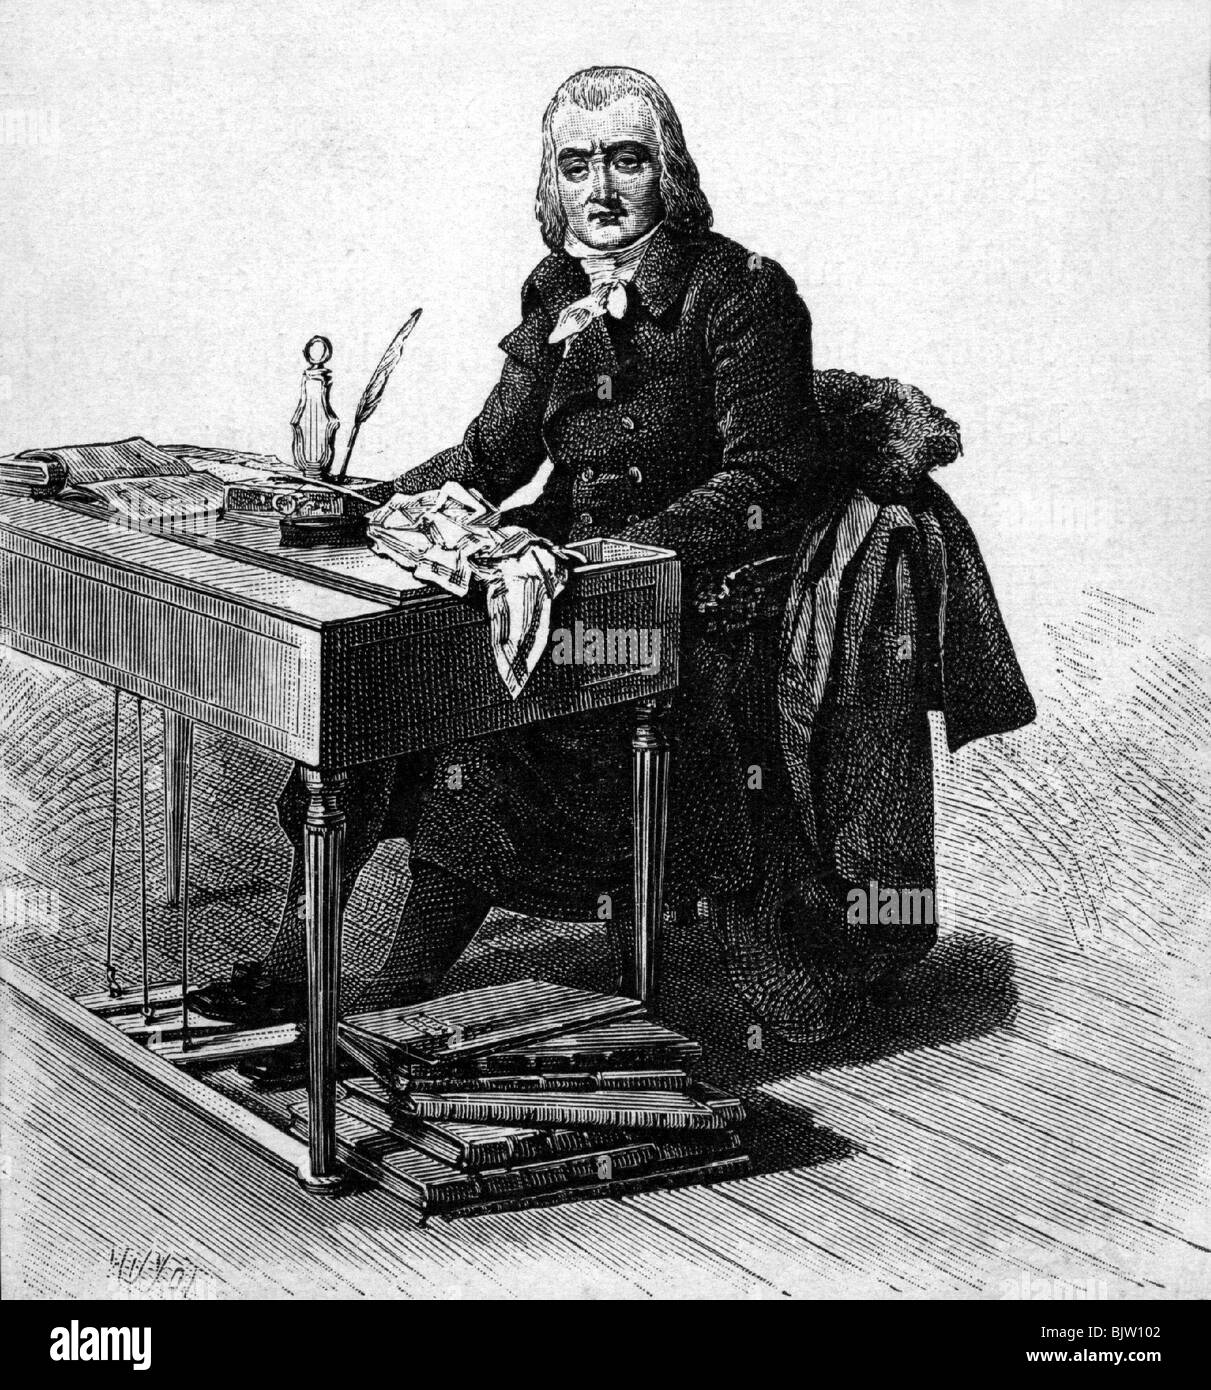 Gretry, Andre Ernest Modeste, 8.2.1741 - 24.9.1813, French musician (composer), half length, composing at piano, wood engraving, 19th century, Stock Photo